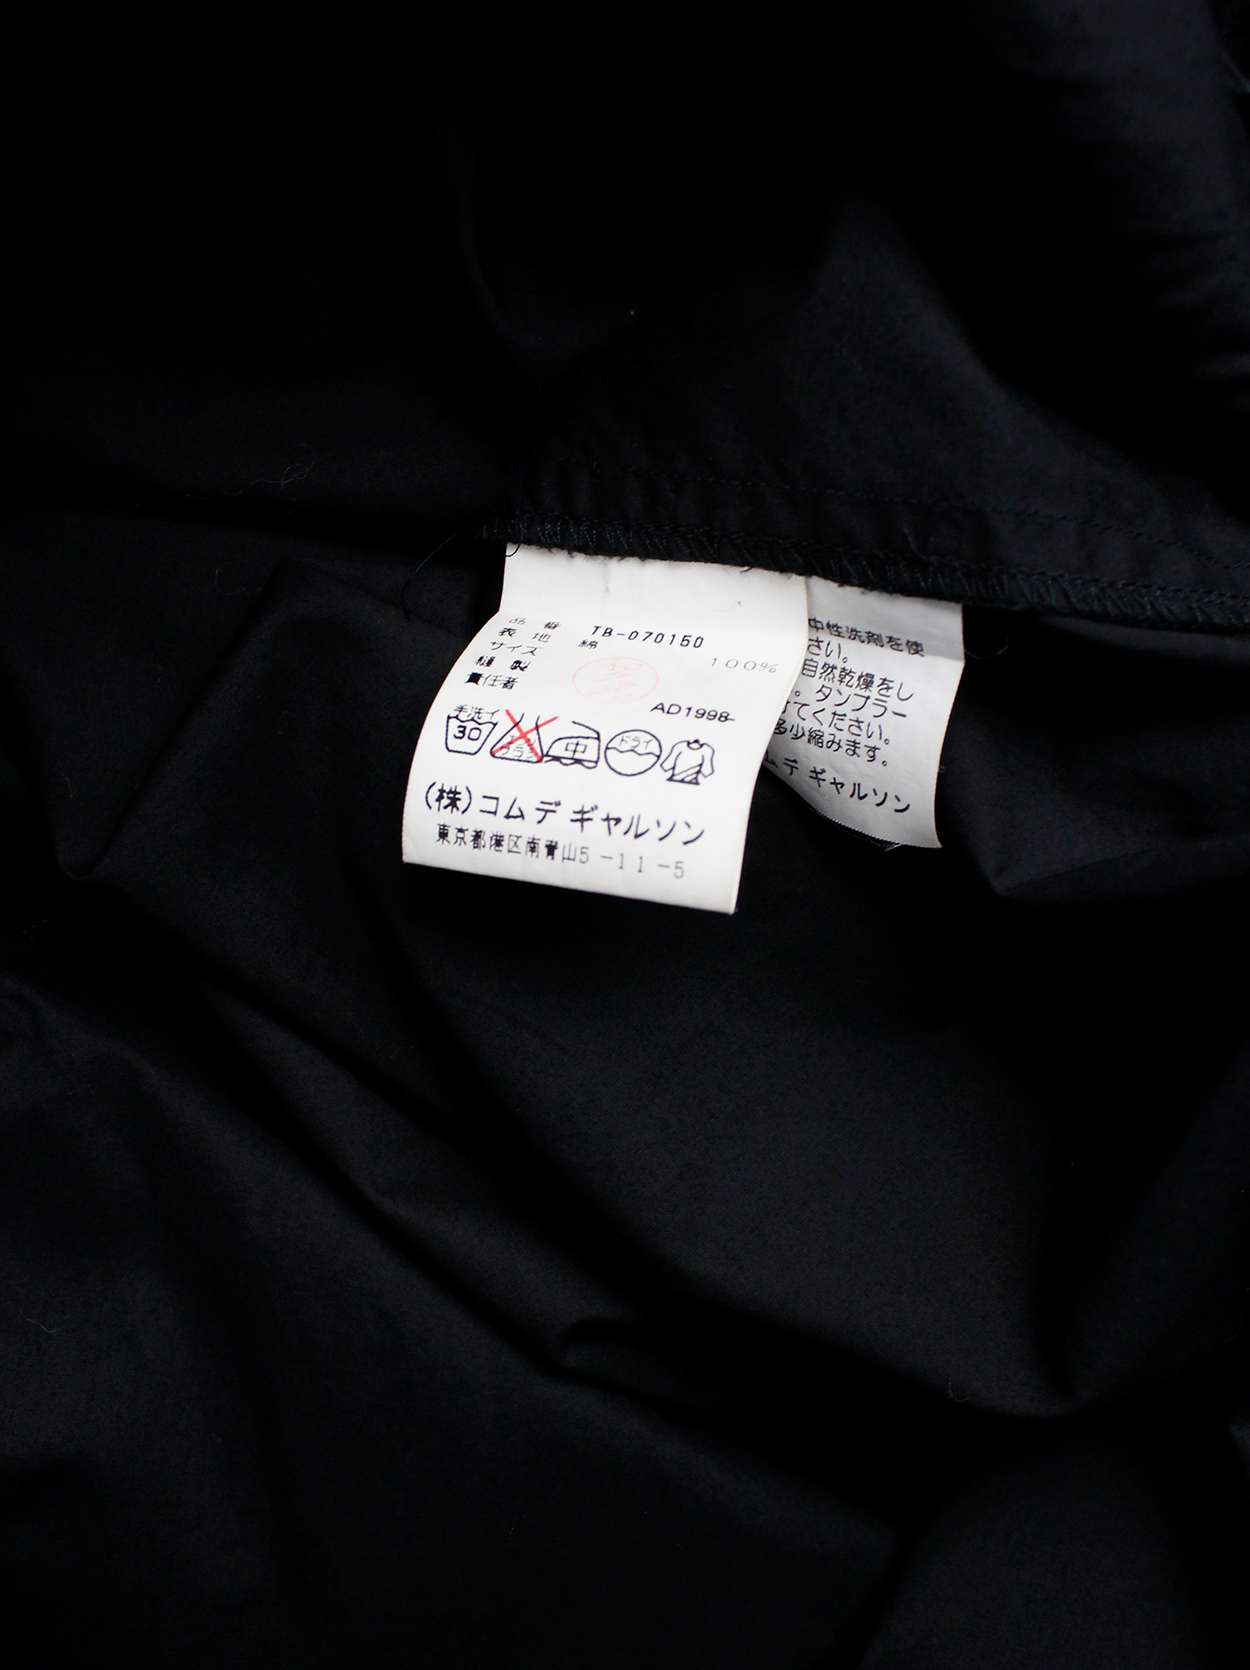 Comme des Garçons tricot black shirt with pleated peplum on the front ...